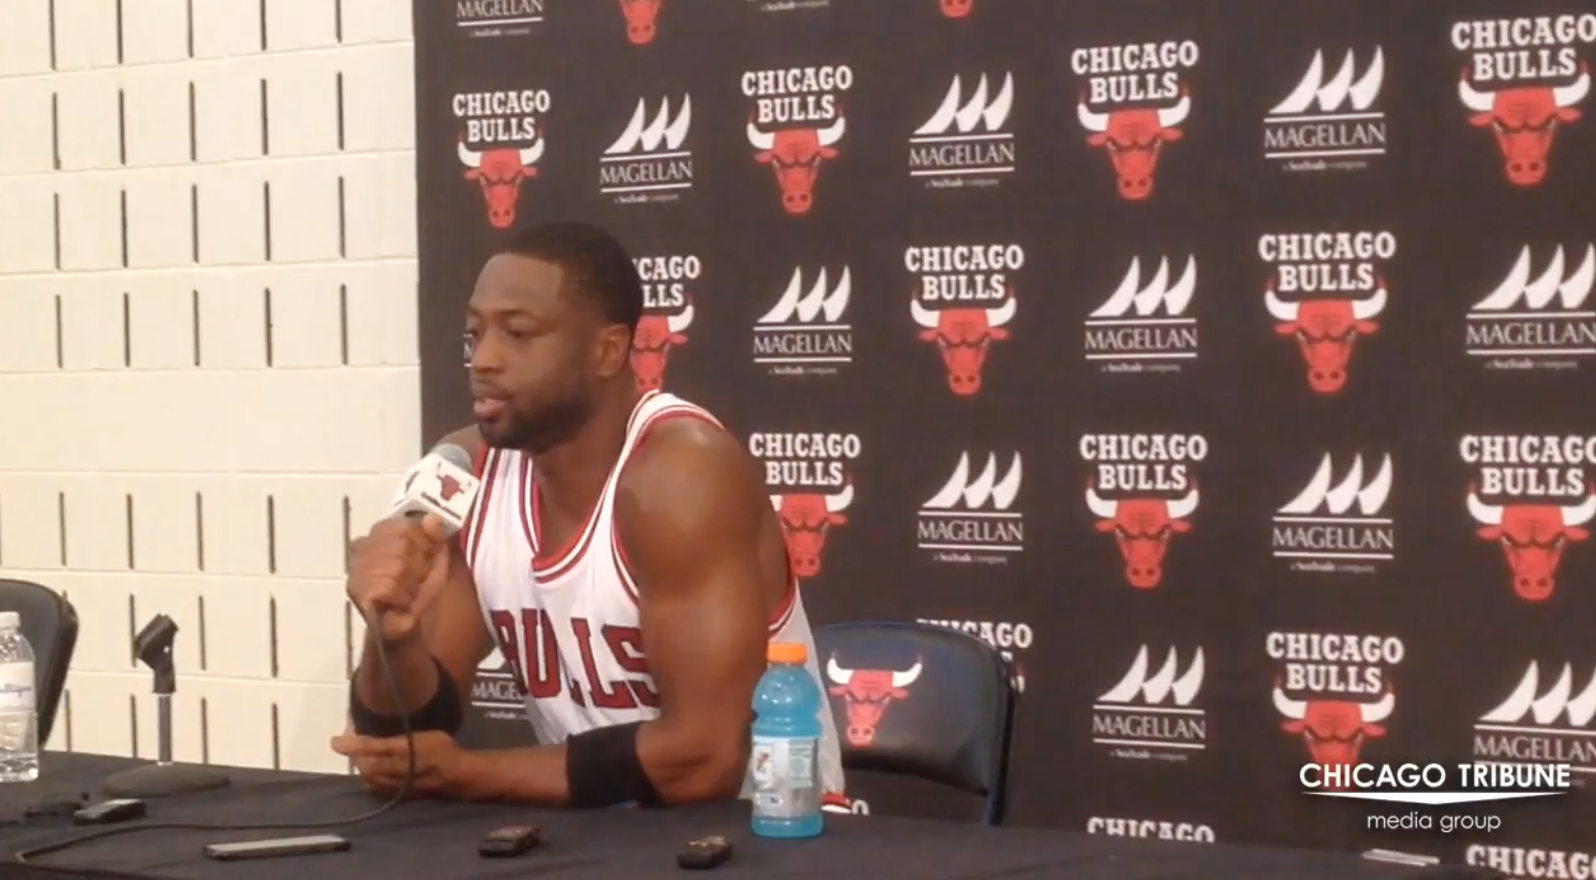 Bulls' Dwyane Wade on his expectations